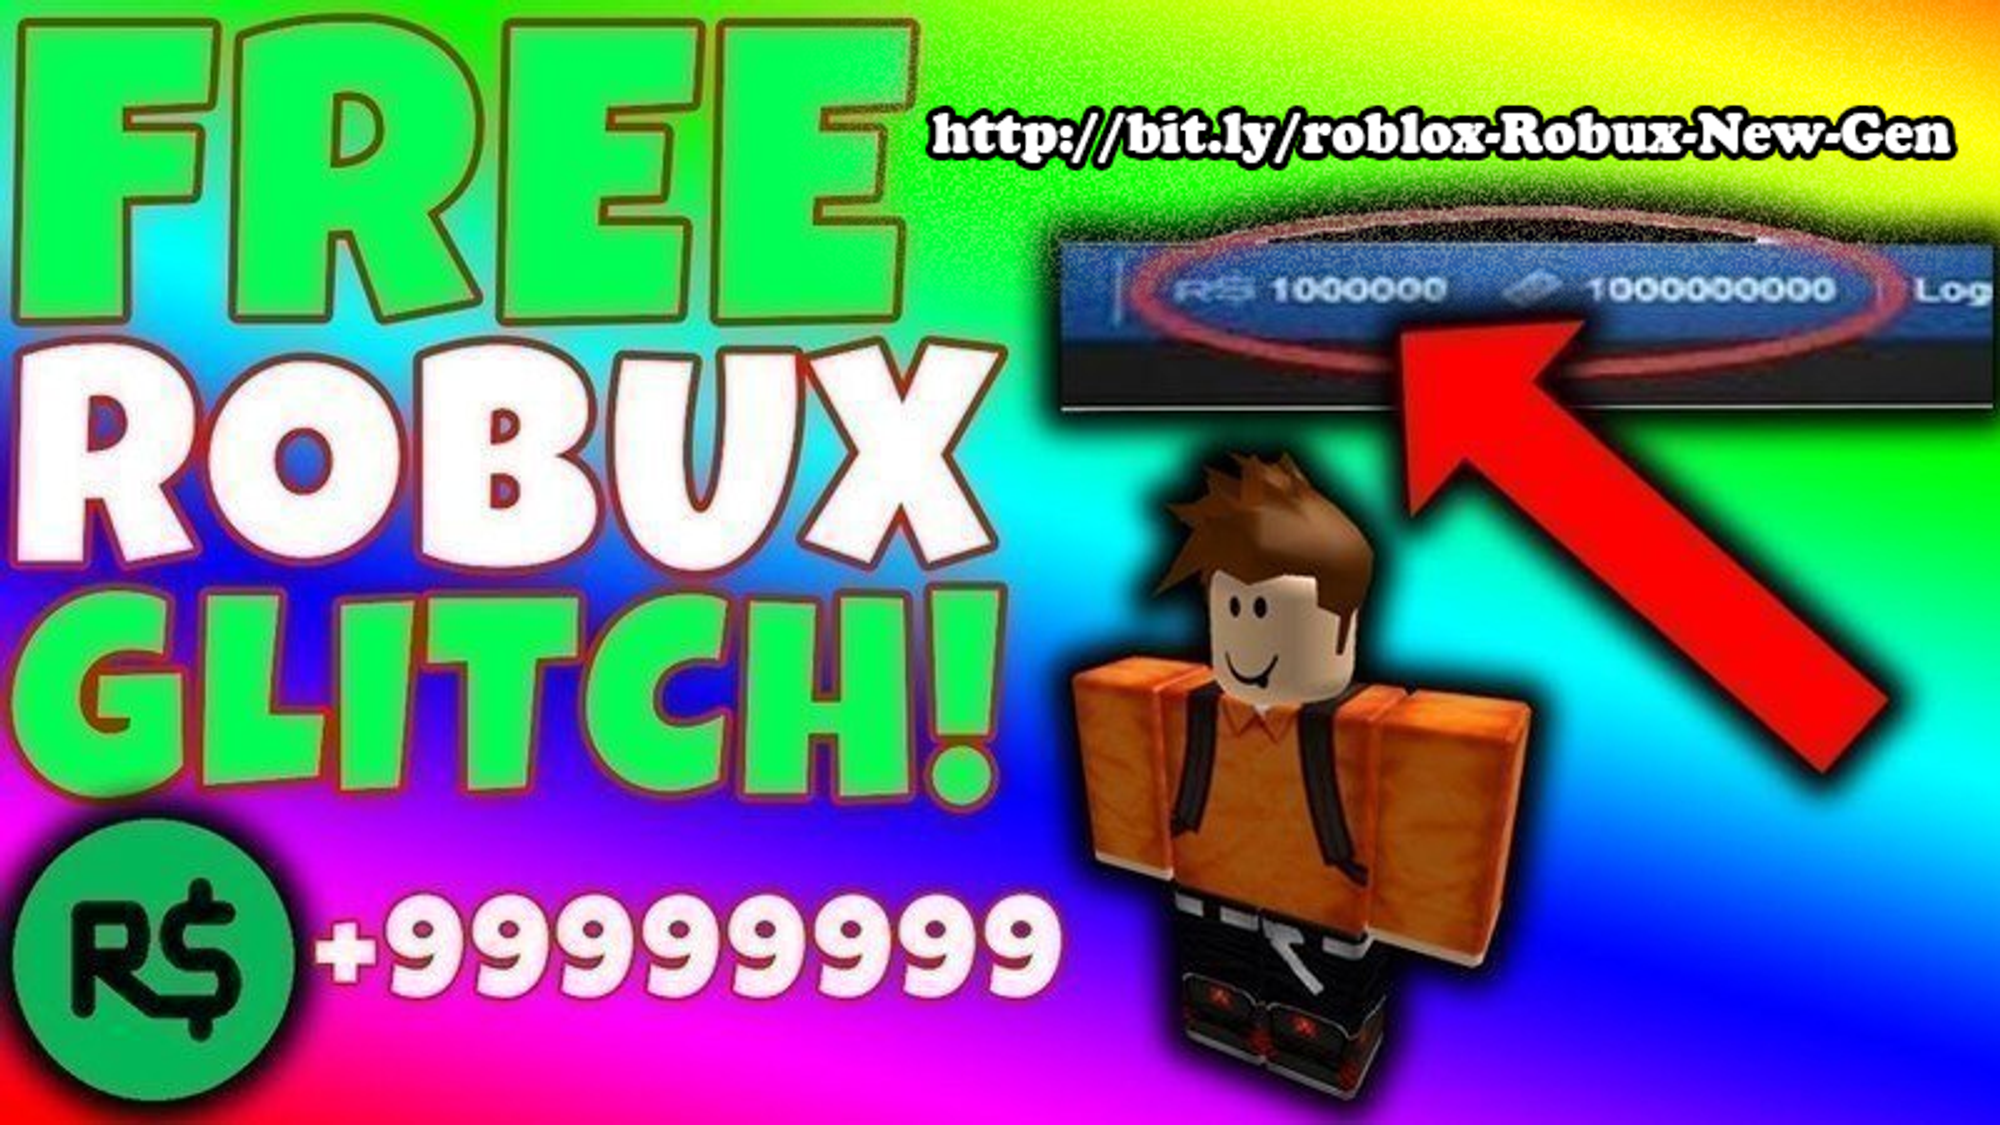 2020 How To Get Free Robux On Pc Mac Ps4 Xbox One No Human Verification Robux Generator - robux hack pc 2020